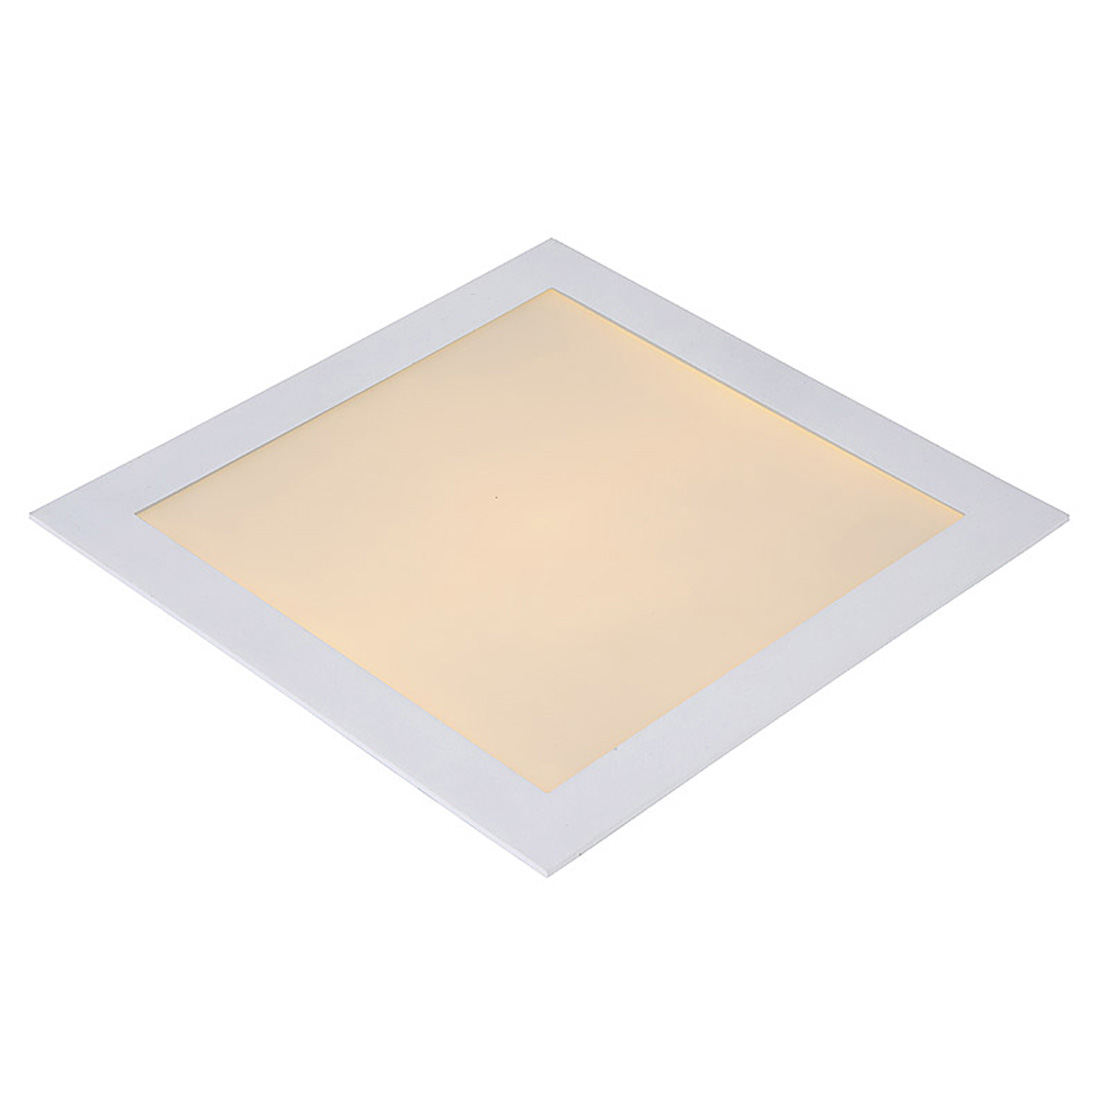 Lucide BRICE-LED - Recessed Lamp - White - Integrated LED - 30W (incl.)